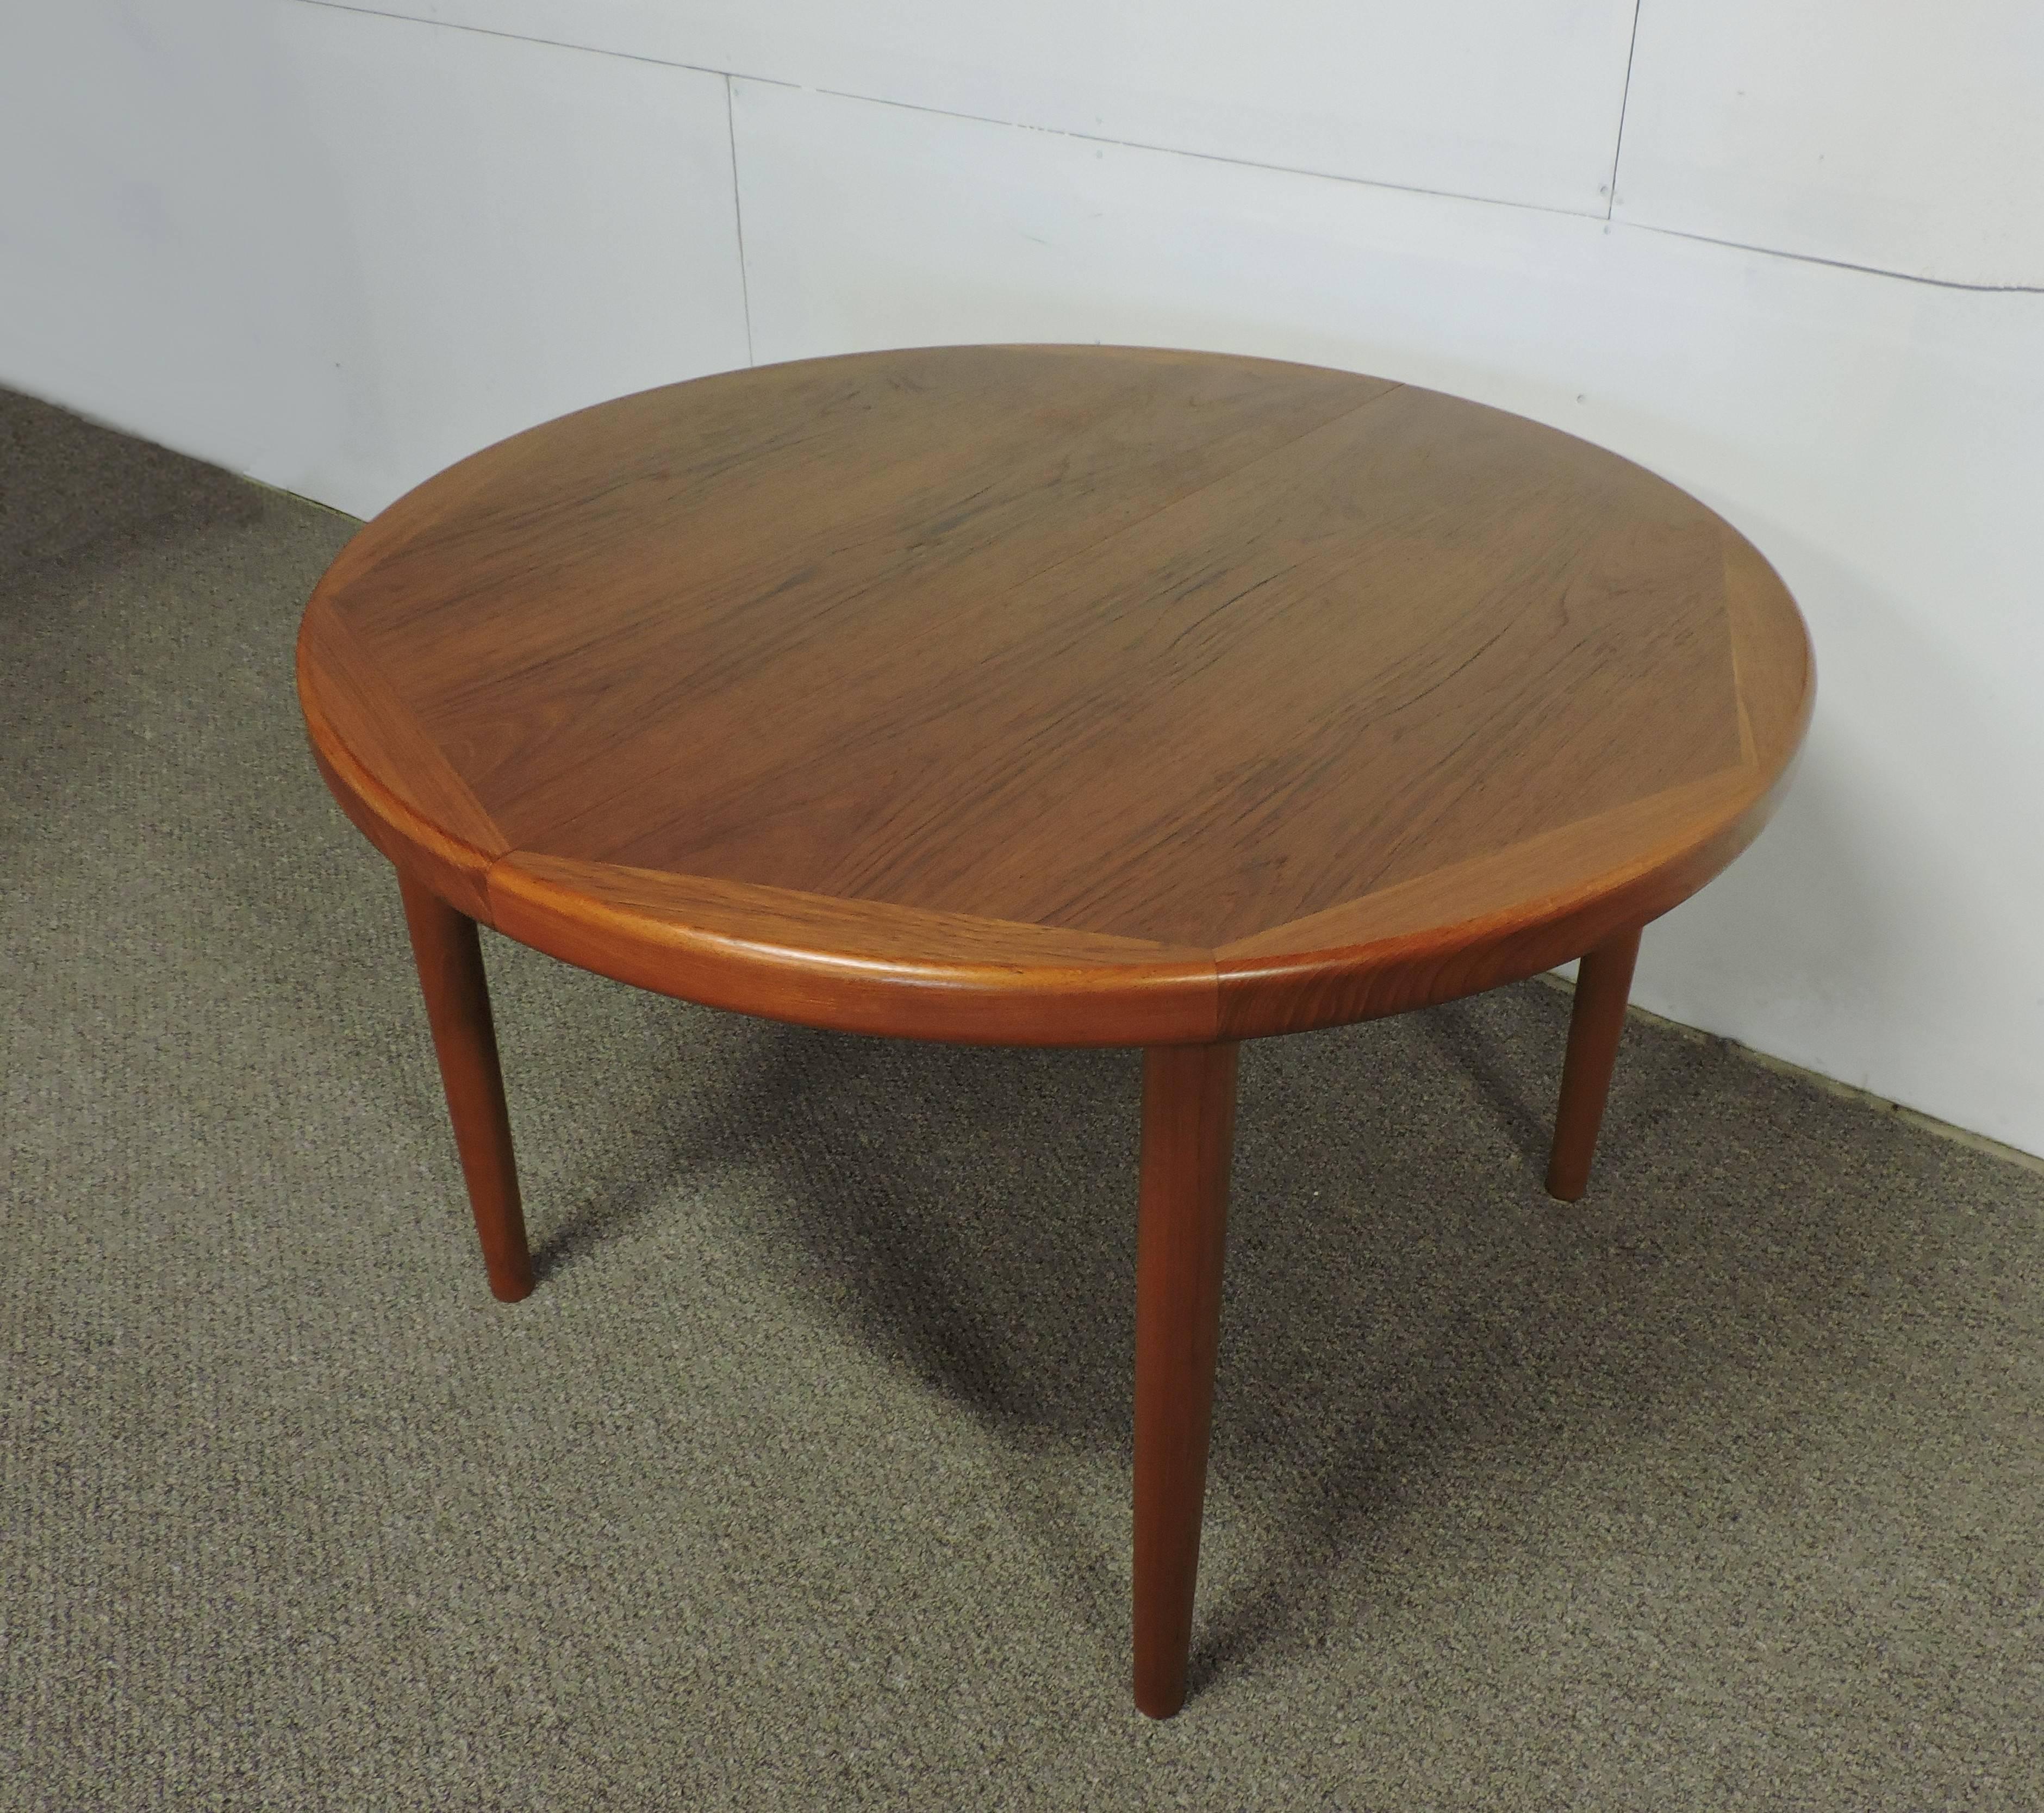 Wonderful teak dining table made in Denmark by Vejle Stole. This round dining table can extend to a large 86 inch long oval with the installation of two leaves. Solidly constructed, it has a beautiful wood grain pattern and four solid teak tapered